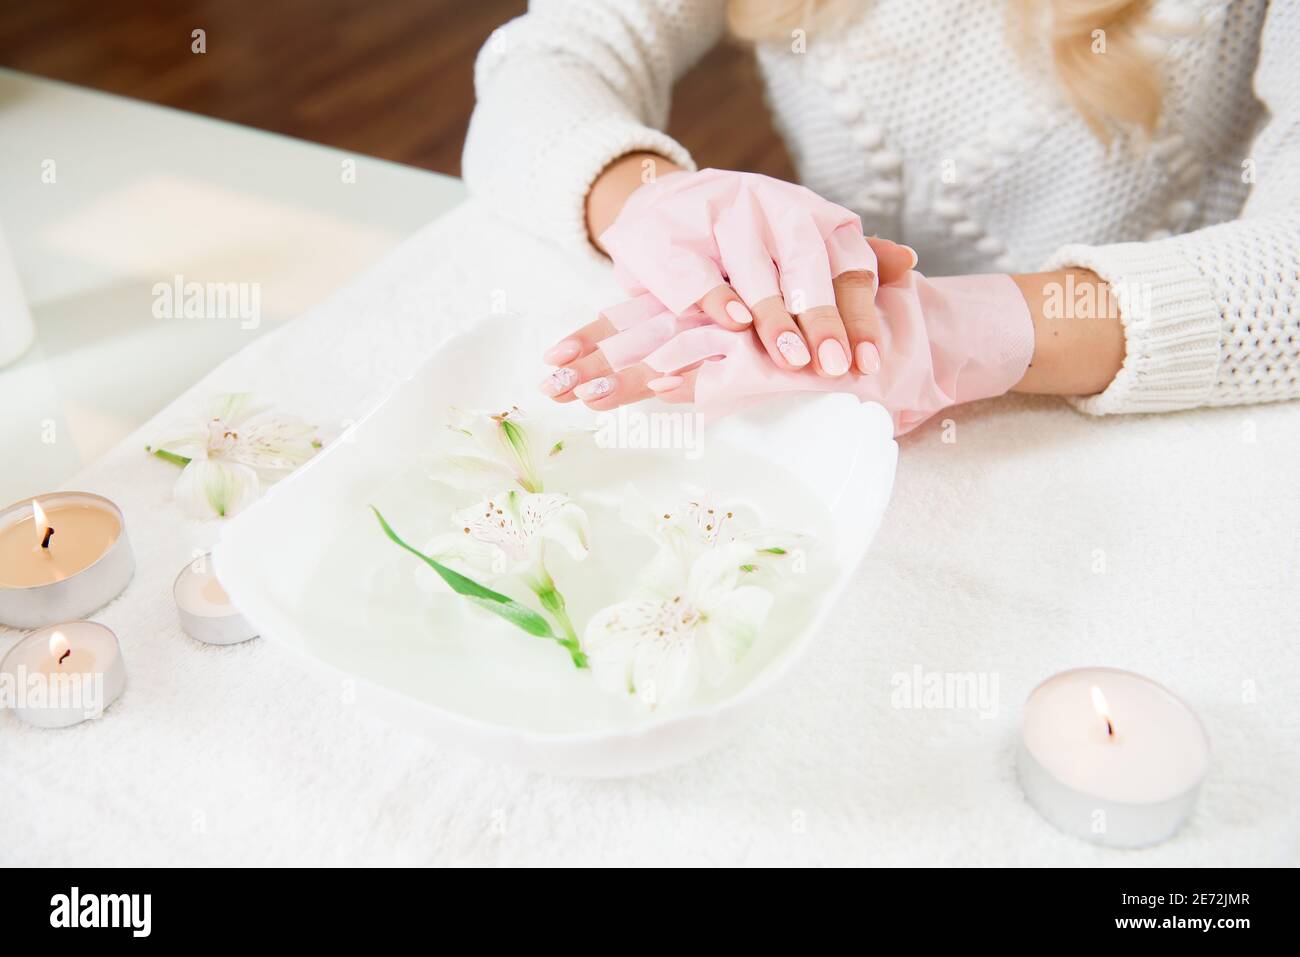 Woman hand care. Hands and spa relaxing. Beauty woman nails. Stock Photo